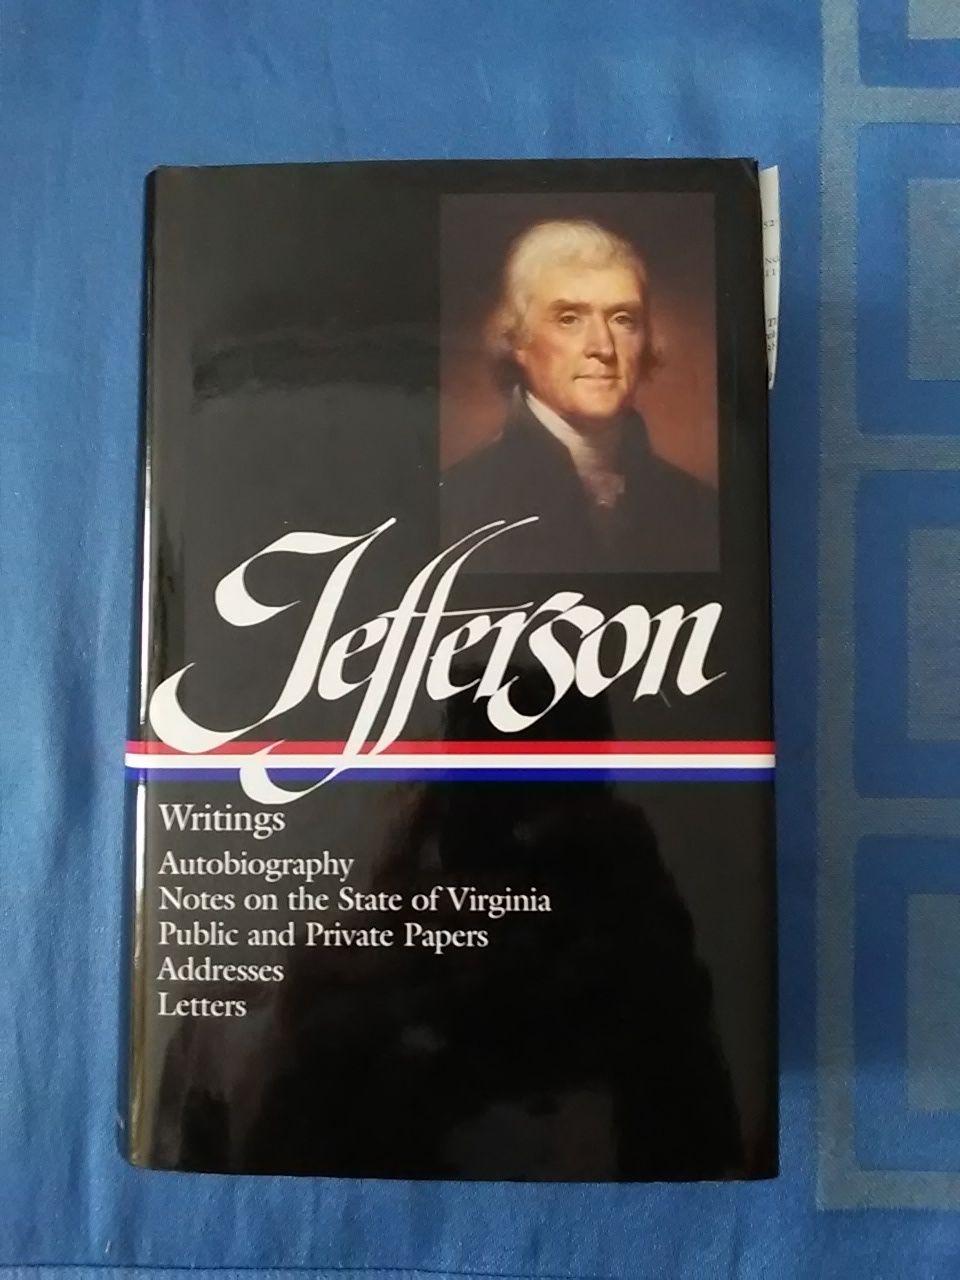 Writings: Autobiography. Notes on the State of Virginia / Public Papers / Addresses / Letters - Jefferson, Thomas.